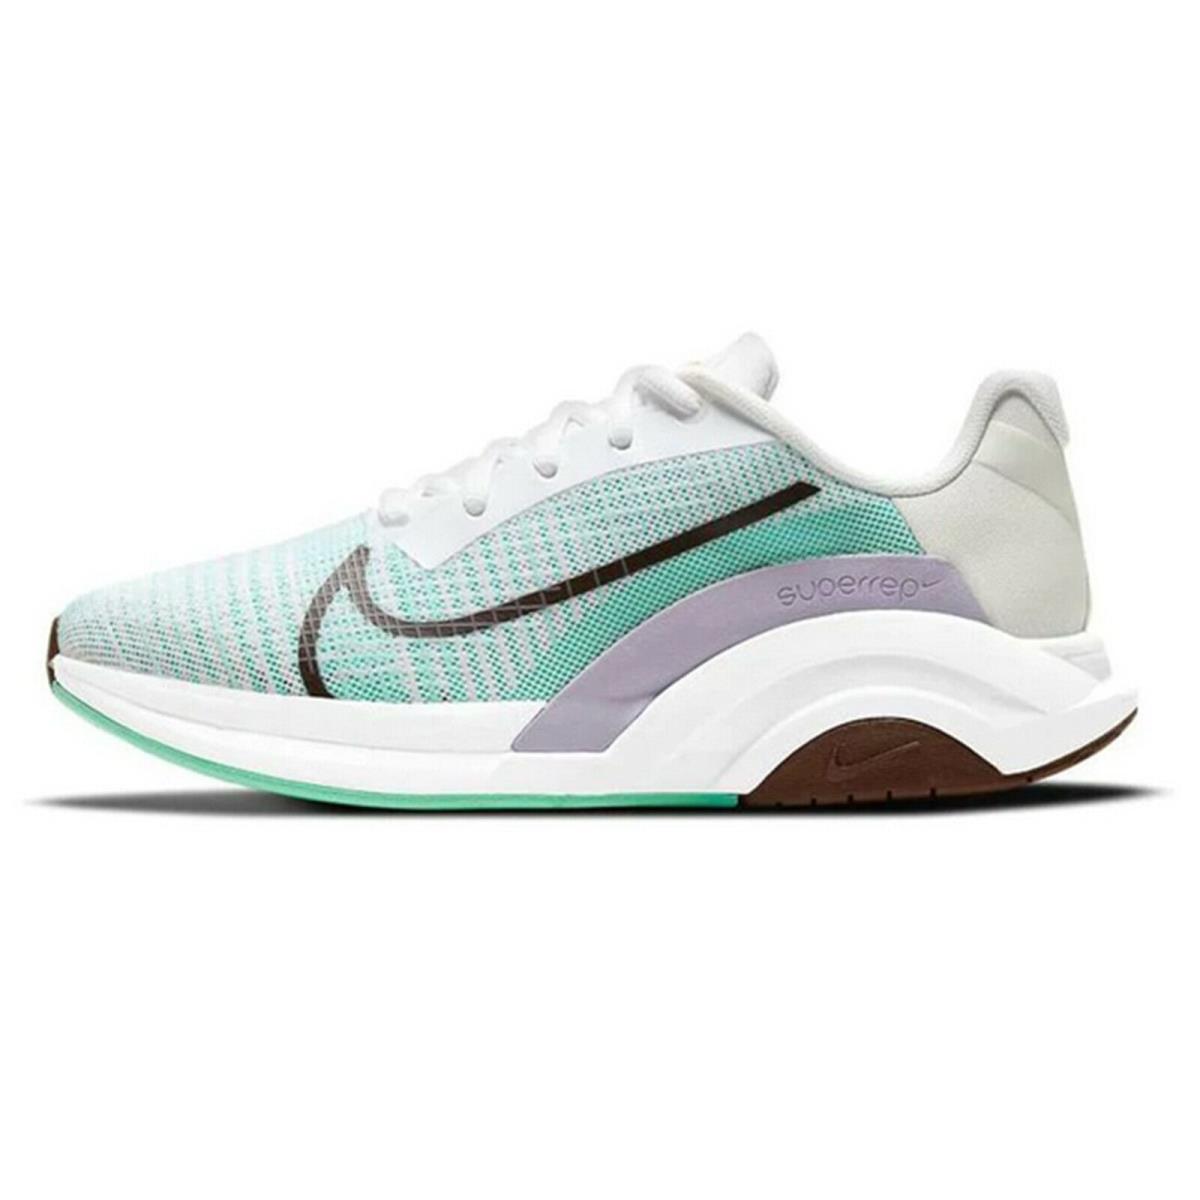 Nike shoes ZOOMX SUPERREP - WHITE/BRONZE ECLIPSE 5